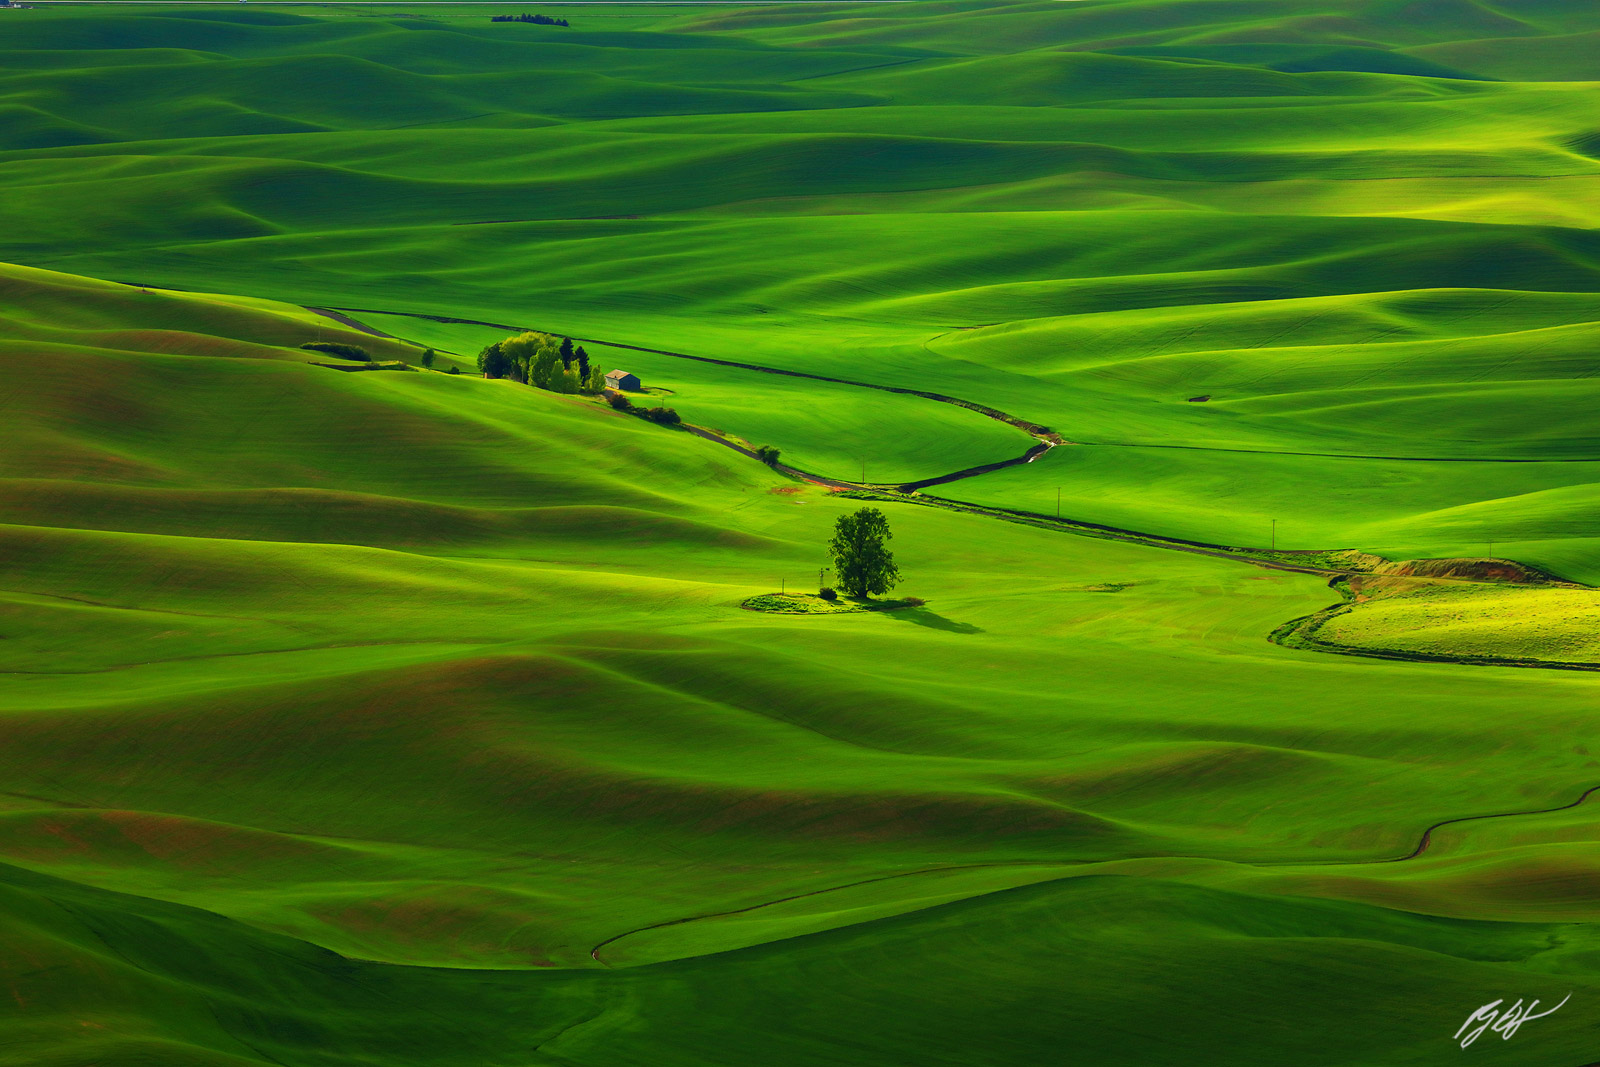 Evening Light on the Palouse Hills from Steptoe Butte in Steptoe Butte State Park in Washington